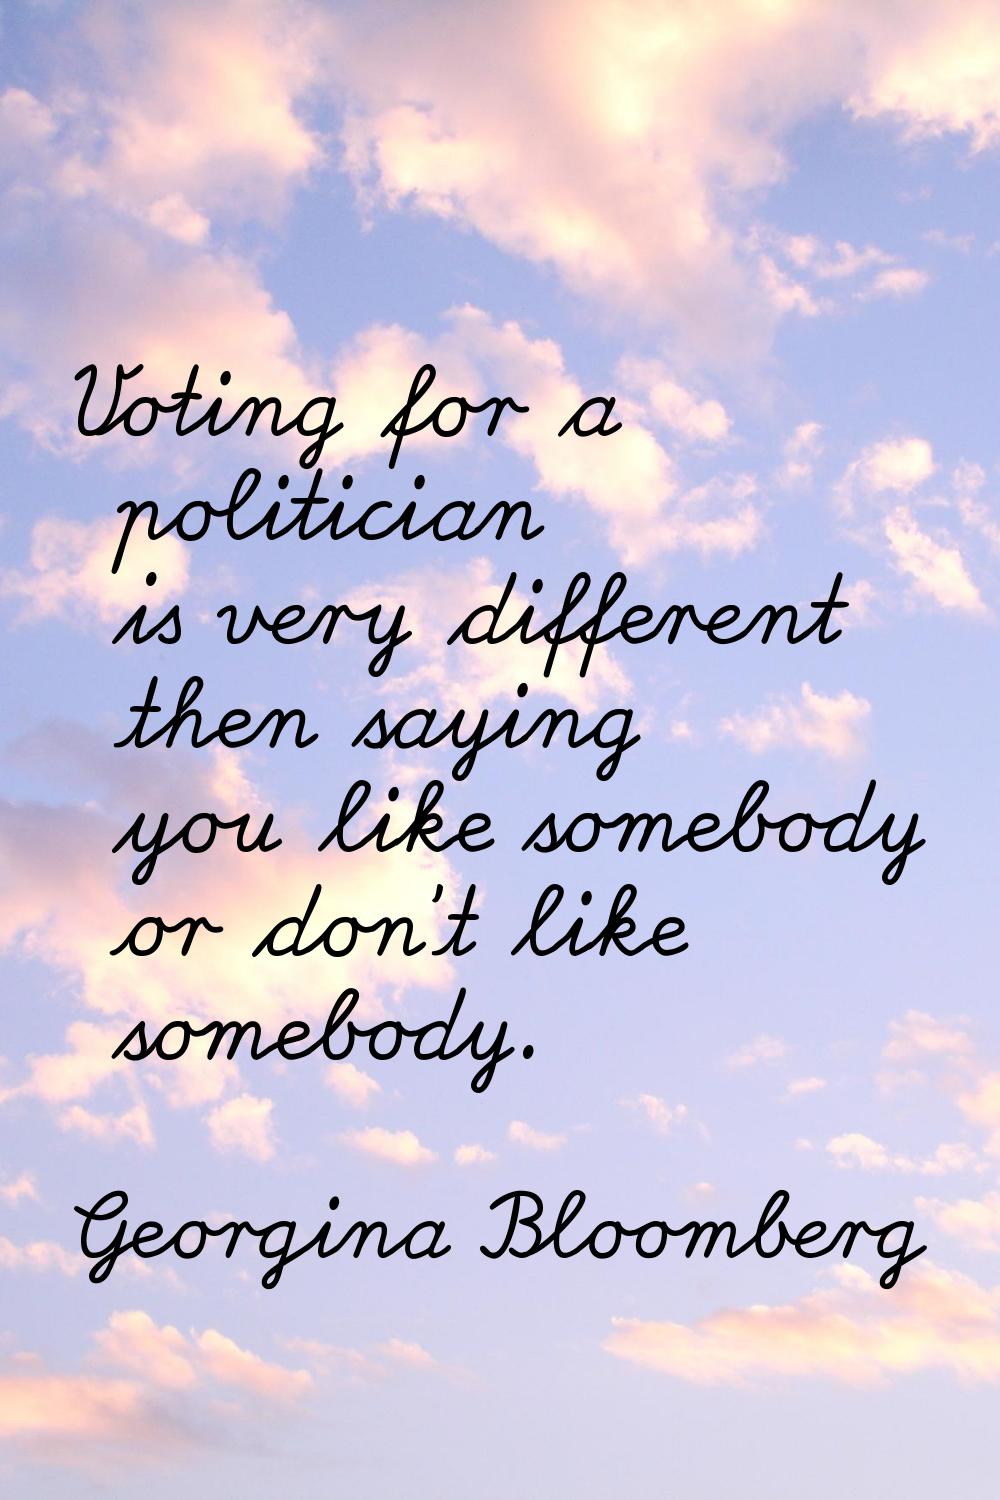 Voting for a politician is very different then saying you like somebody or don't like somebody.